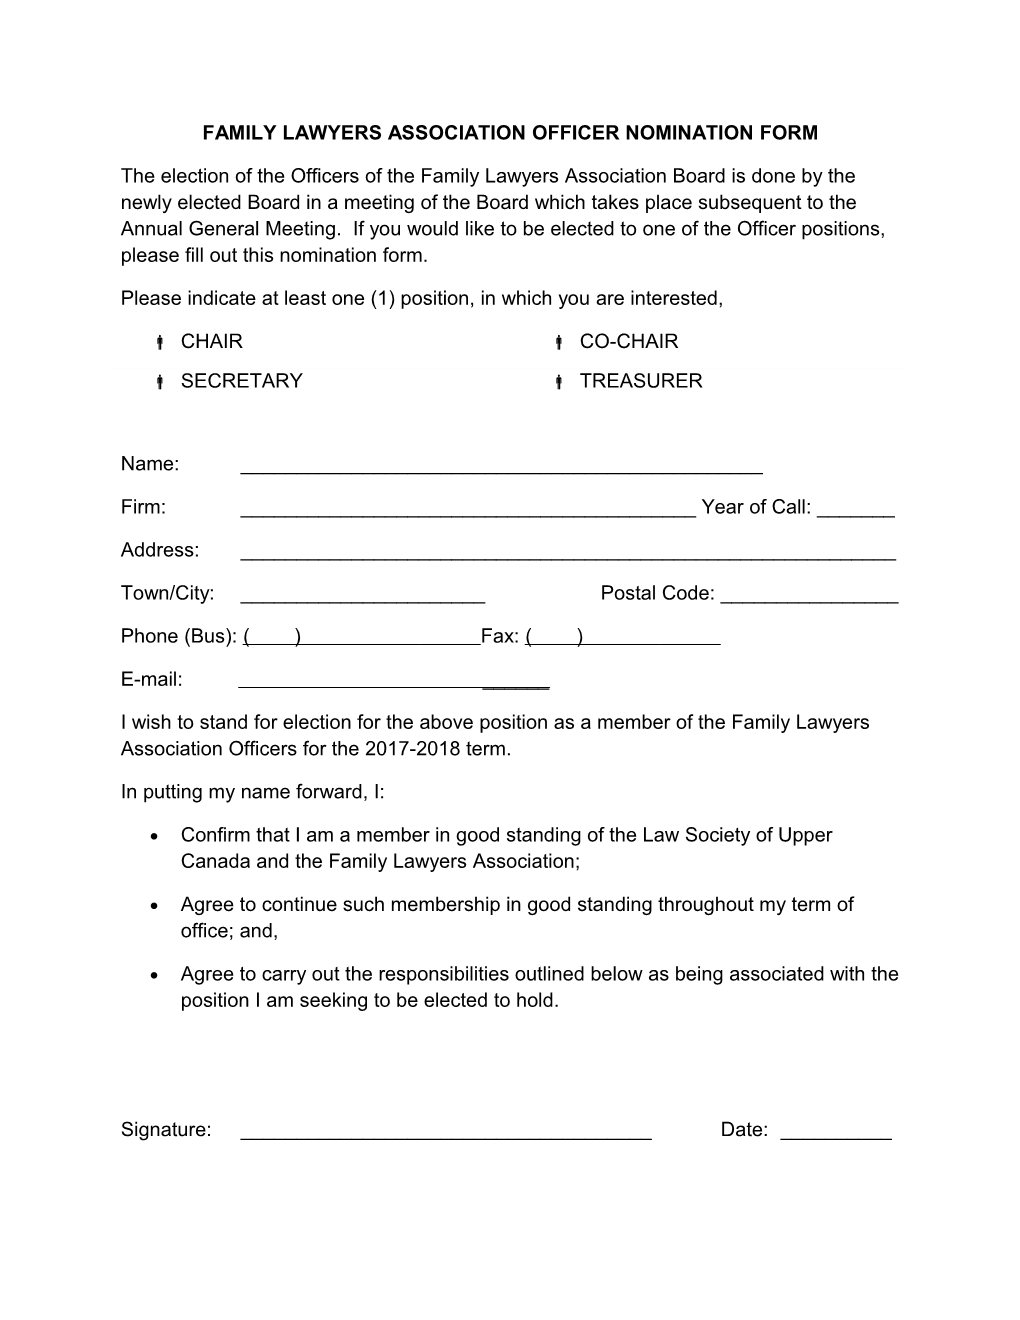 Family Lawyers Association Officer Nomination Form